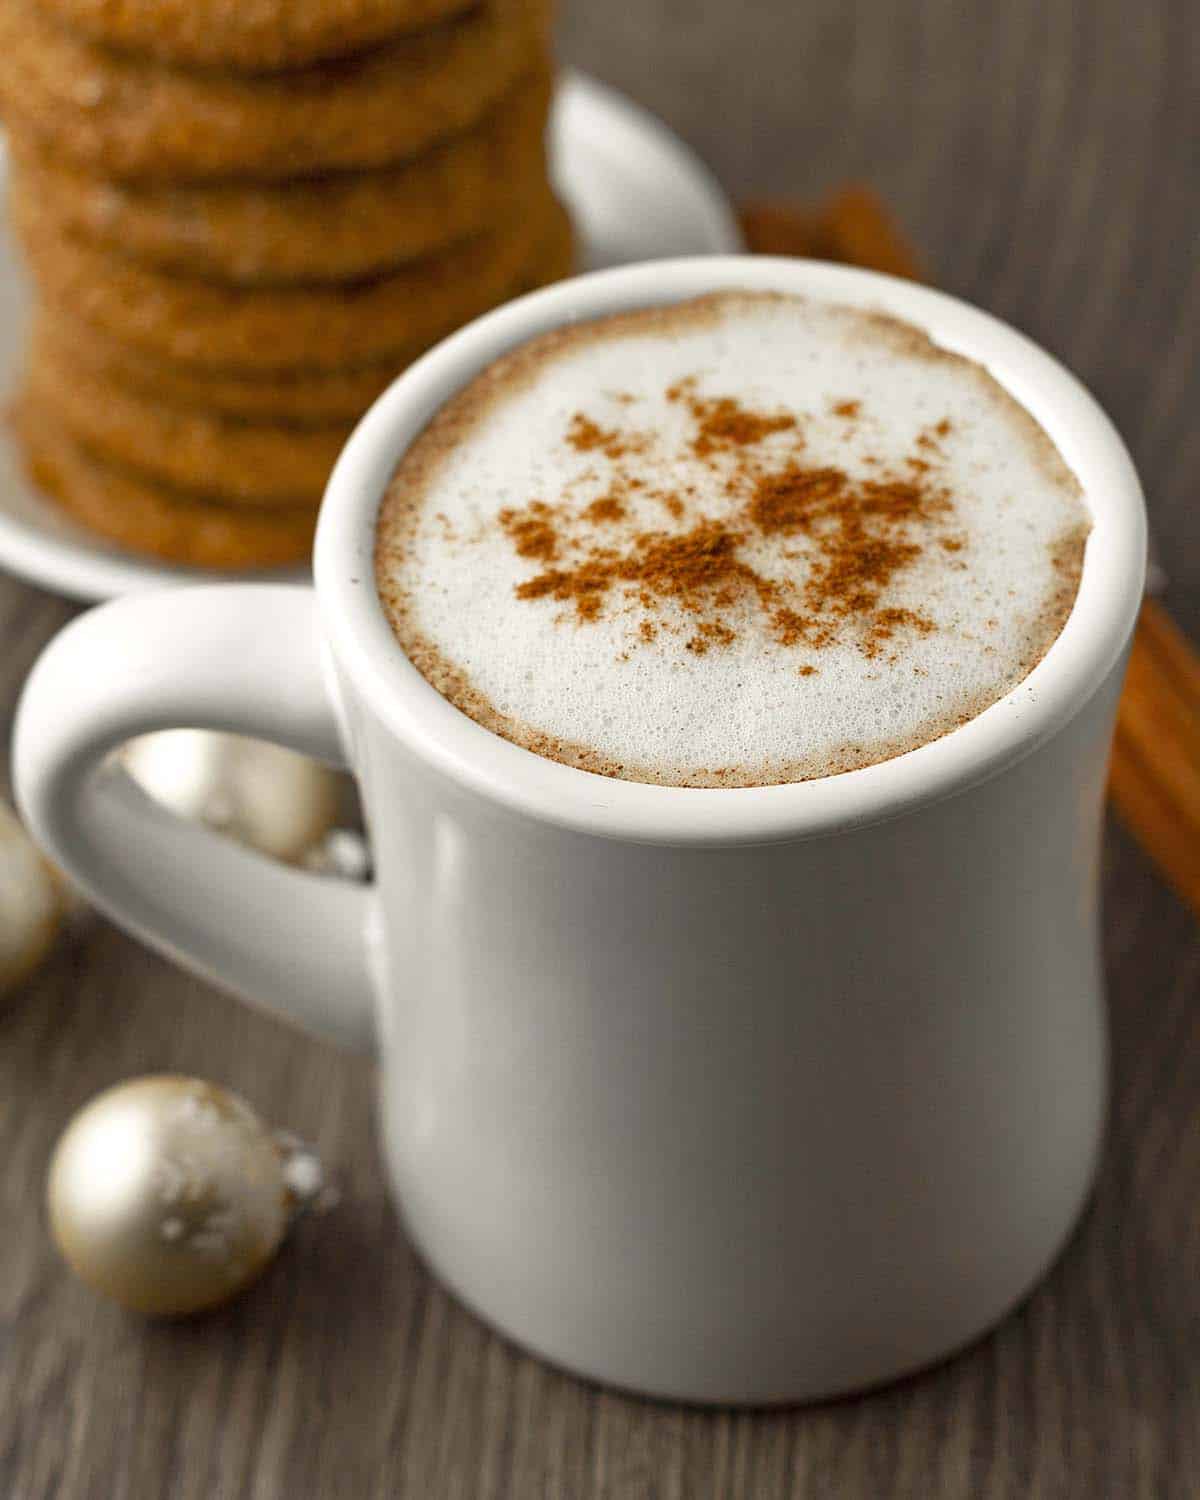 An overhead shot showing a homemade gingerbread latte in a white mug, gingerbread cookies sit behind the mug.